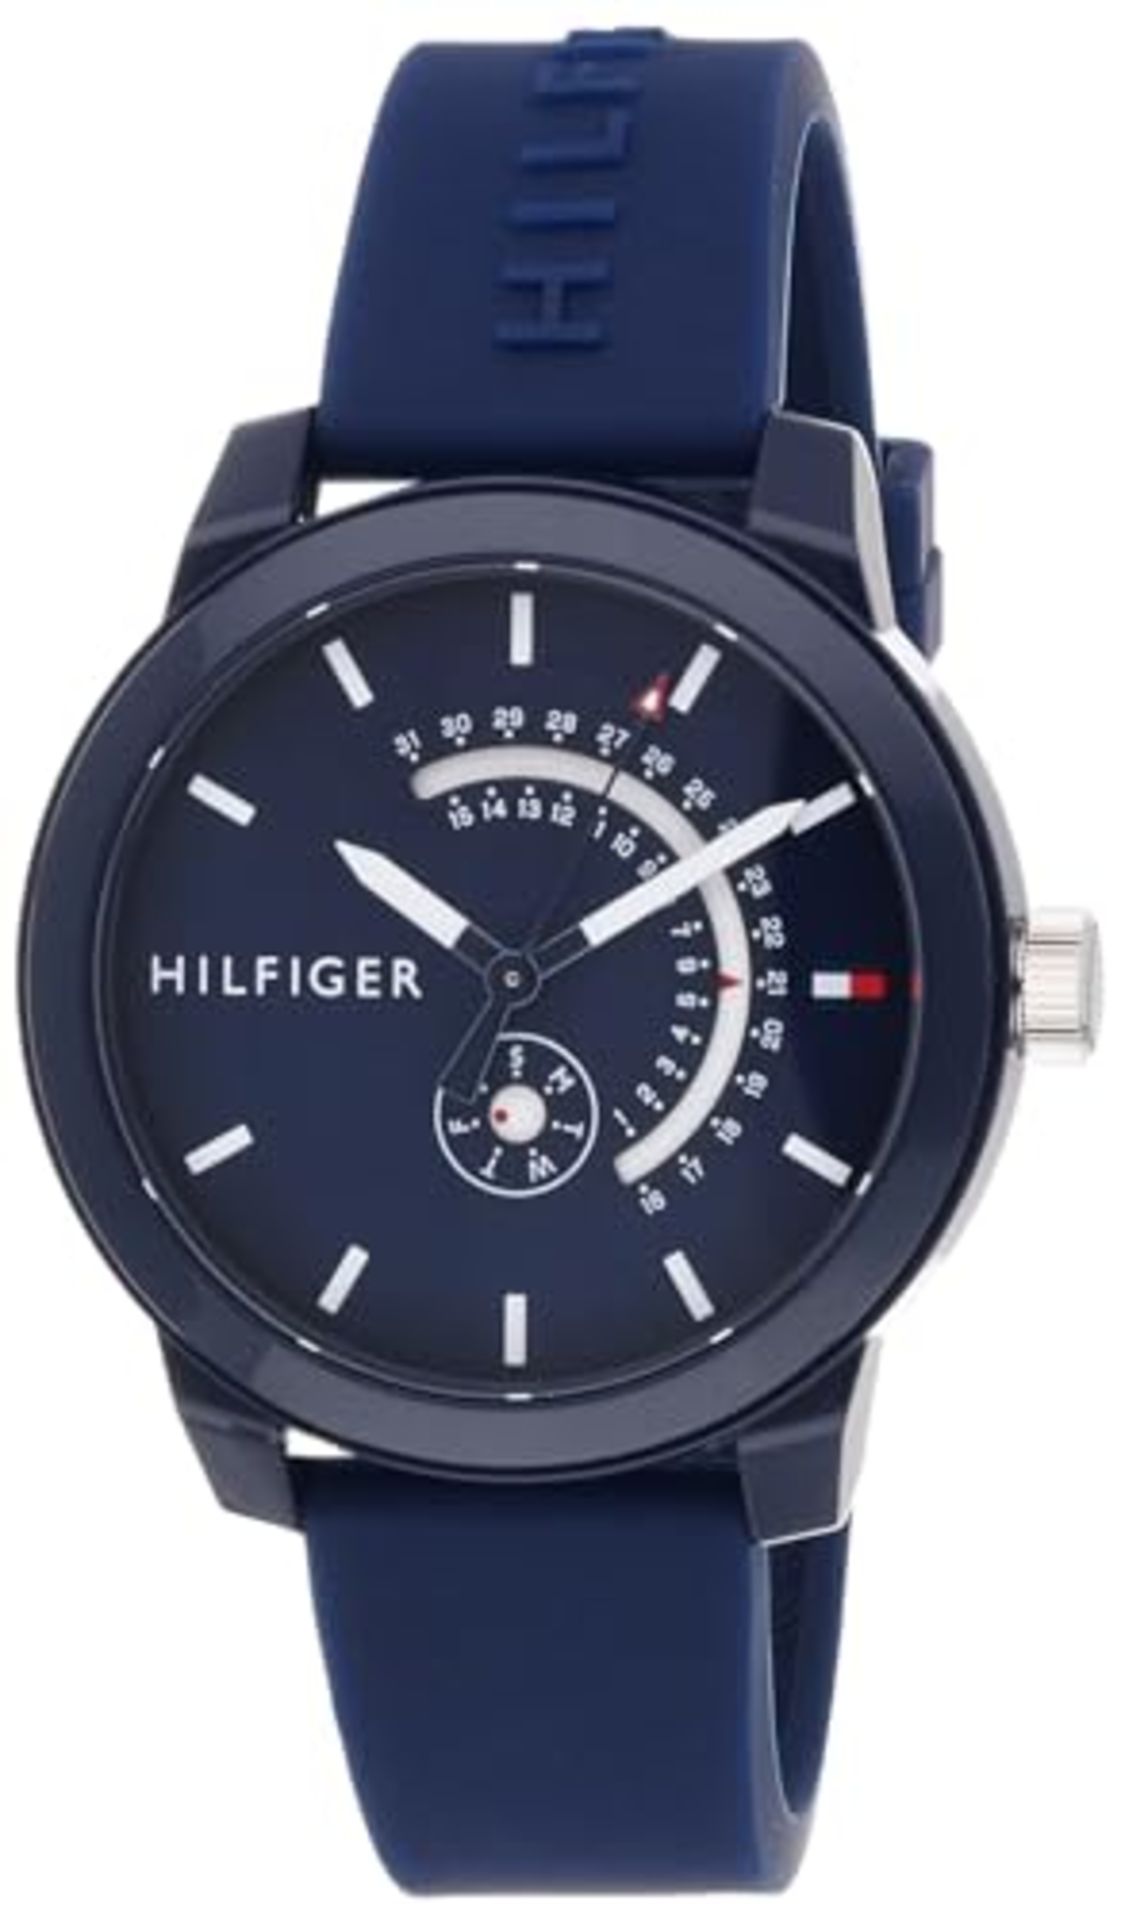 RRP £98.00 Tommy Hilfiger Men's Analog Quartz Watch with Blue Silicone Strap - 1791482